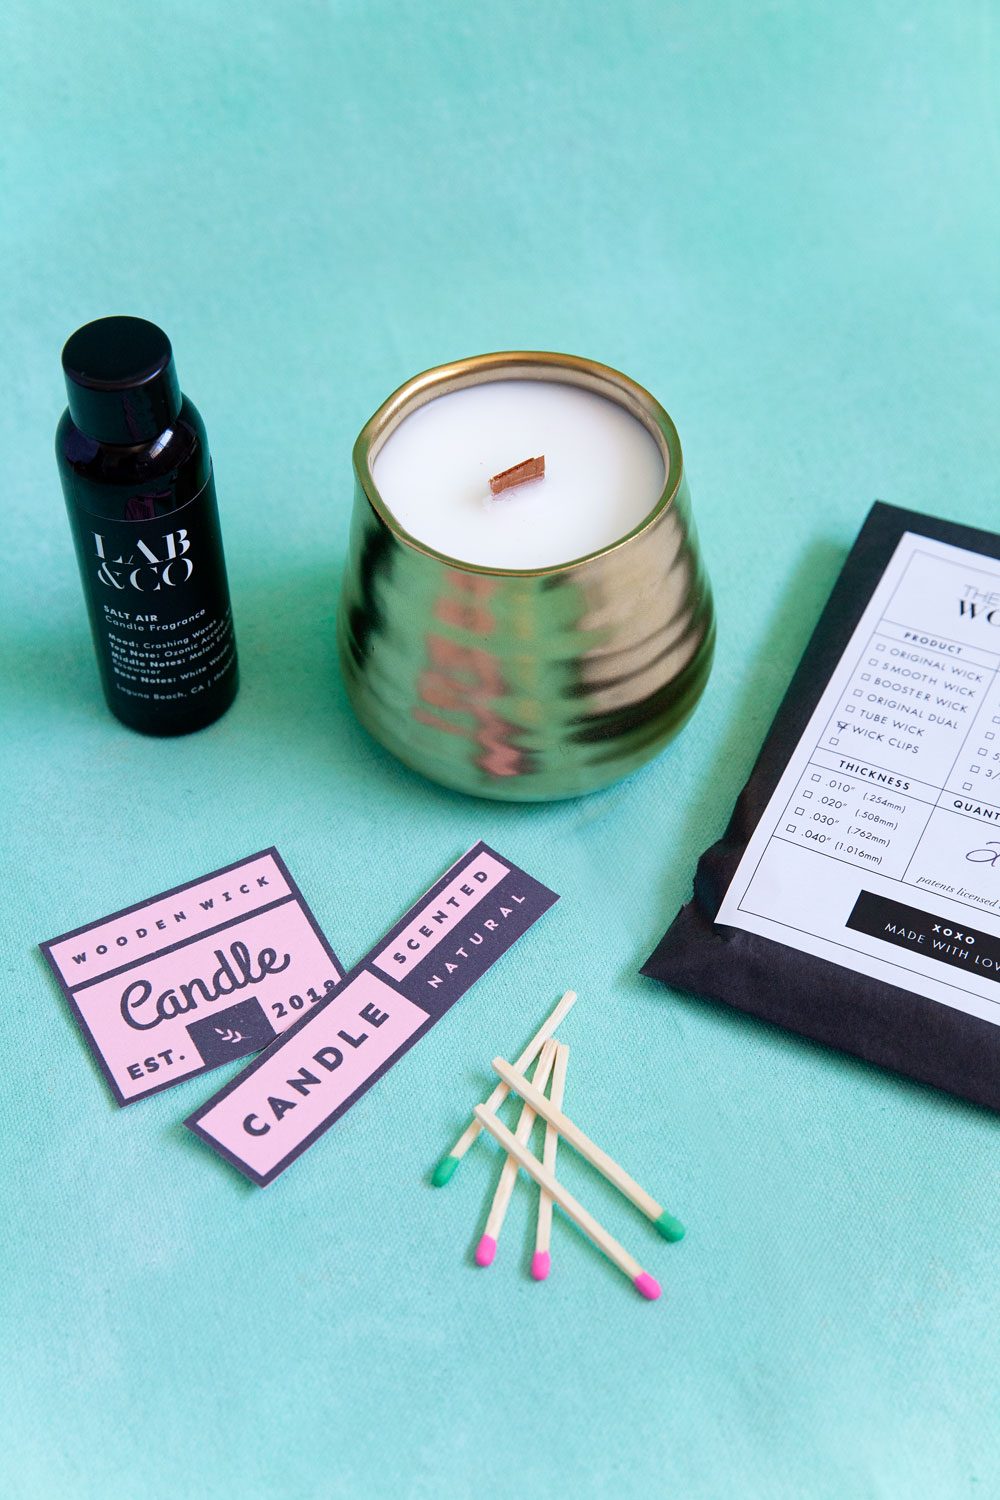 Learn how to make these amazing DIY luxury candles with this amazing company Lab & co.